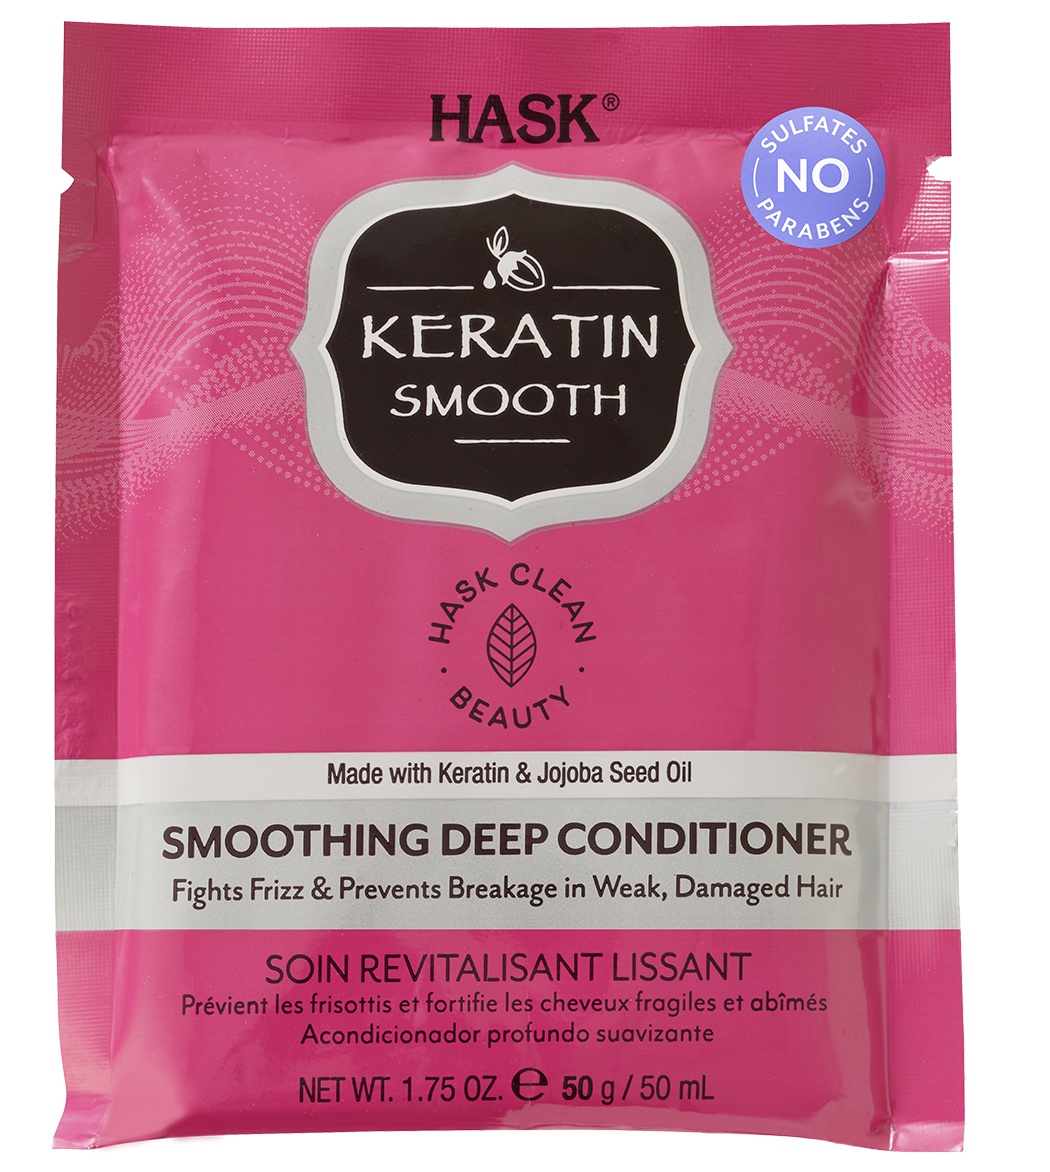 HASK Keratin Smooth Smoothing Deep Conditioner